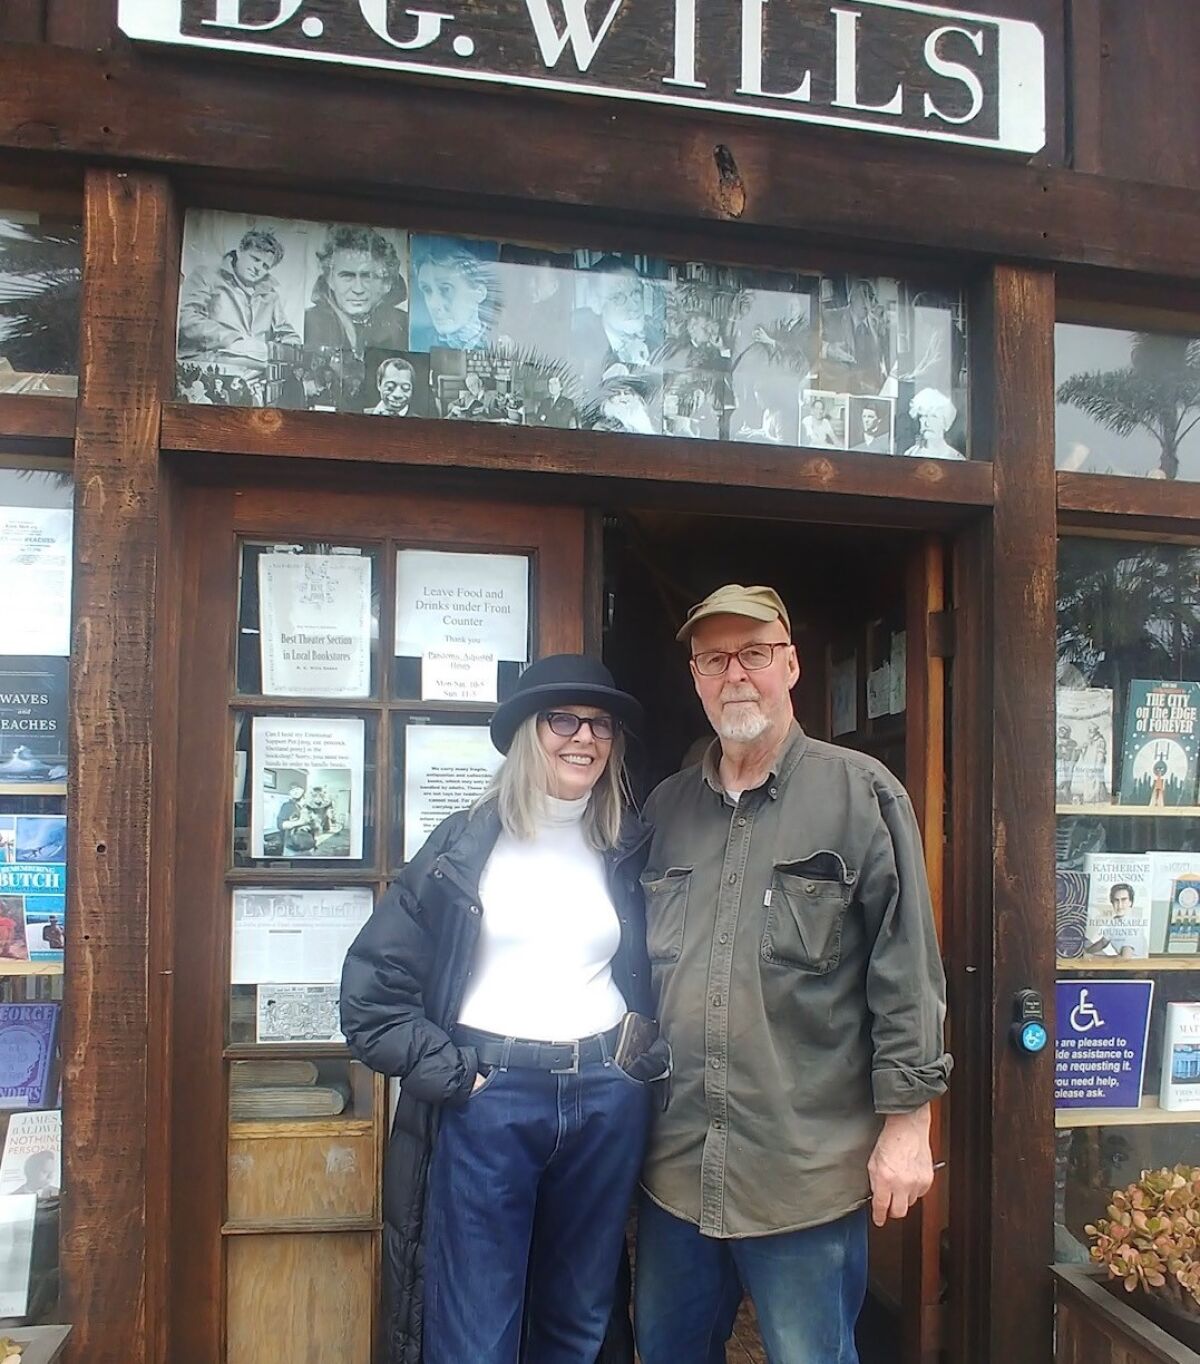 Actress Diane Keaton takes a break from browsing at D.G. Wills Books in La Jolla on June 29 to pose with owner Dennis Wills.